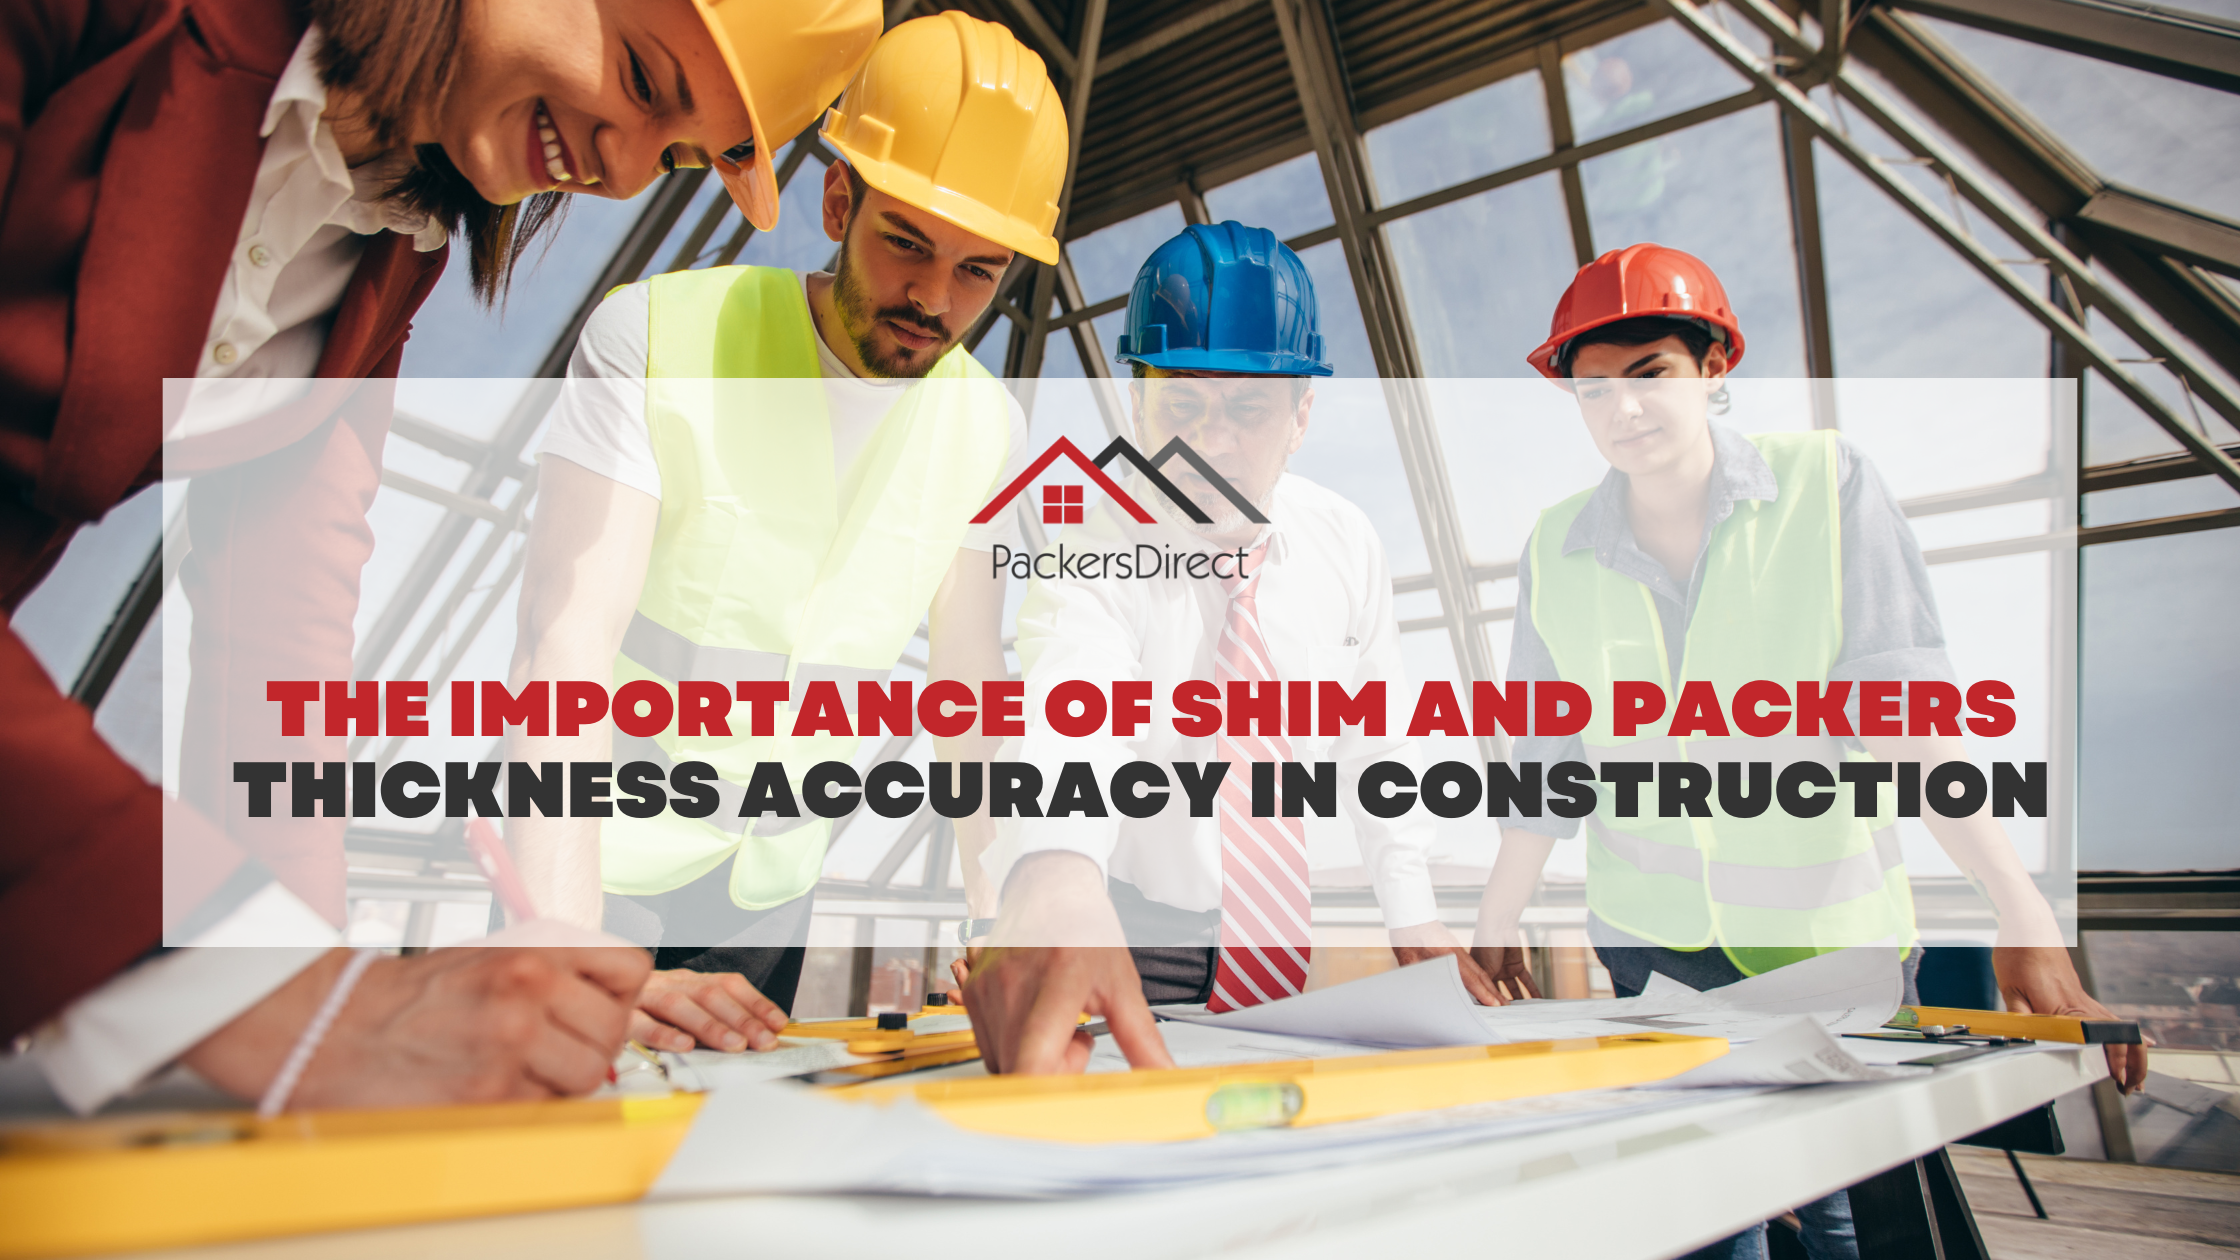 The Importance of Shim and Packers Thickness Accuracy in Construction